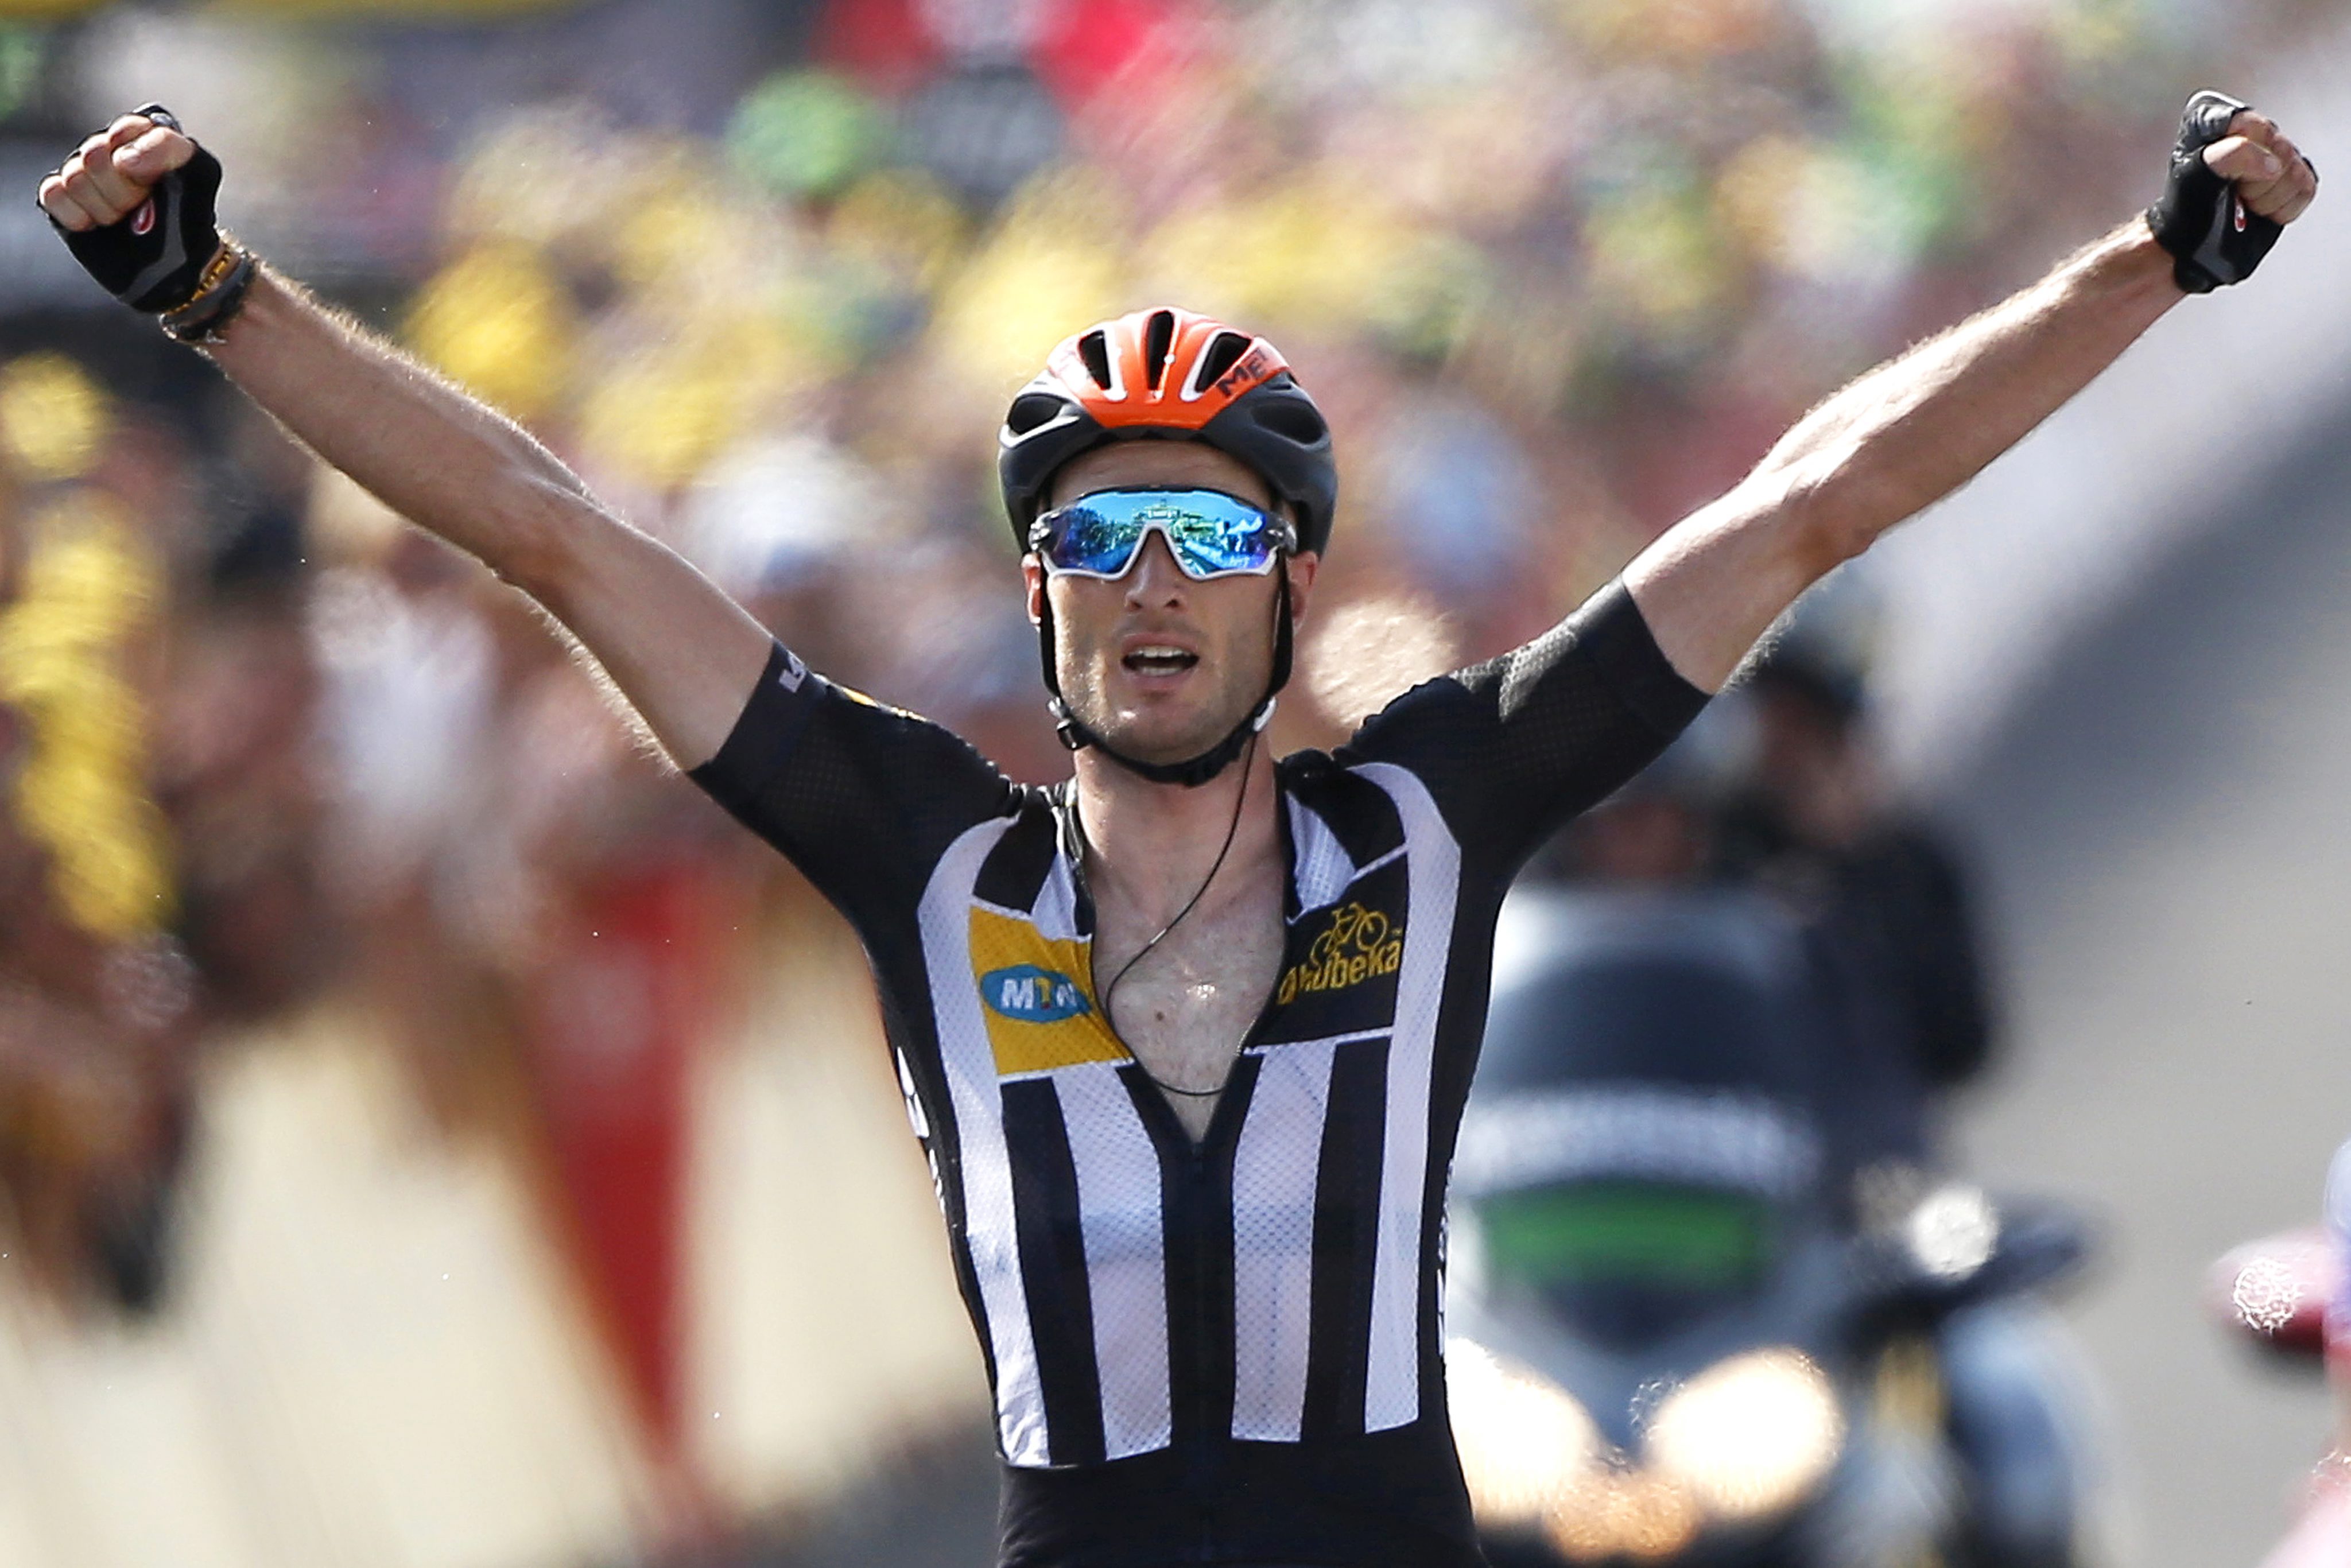 MTN-Qhubeka team rider Stephen Cummings celebrates as he wins the 14th stage of the Tour de France in Mende. Photo: EPA